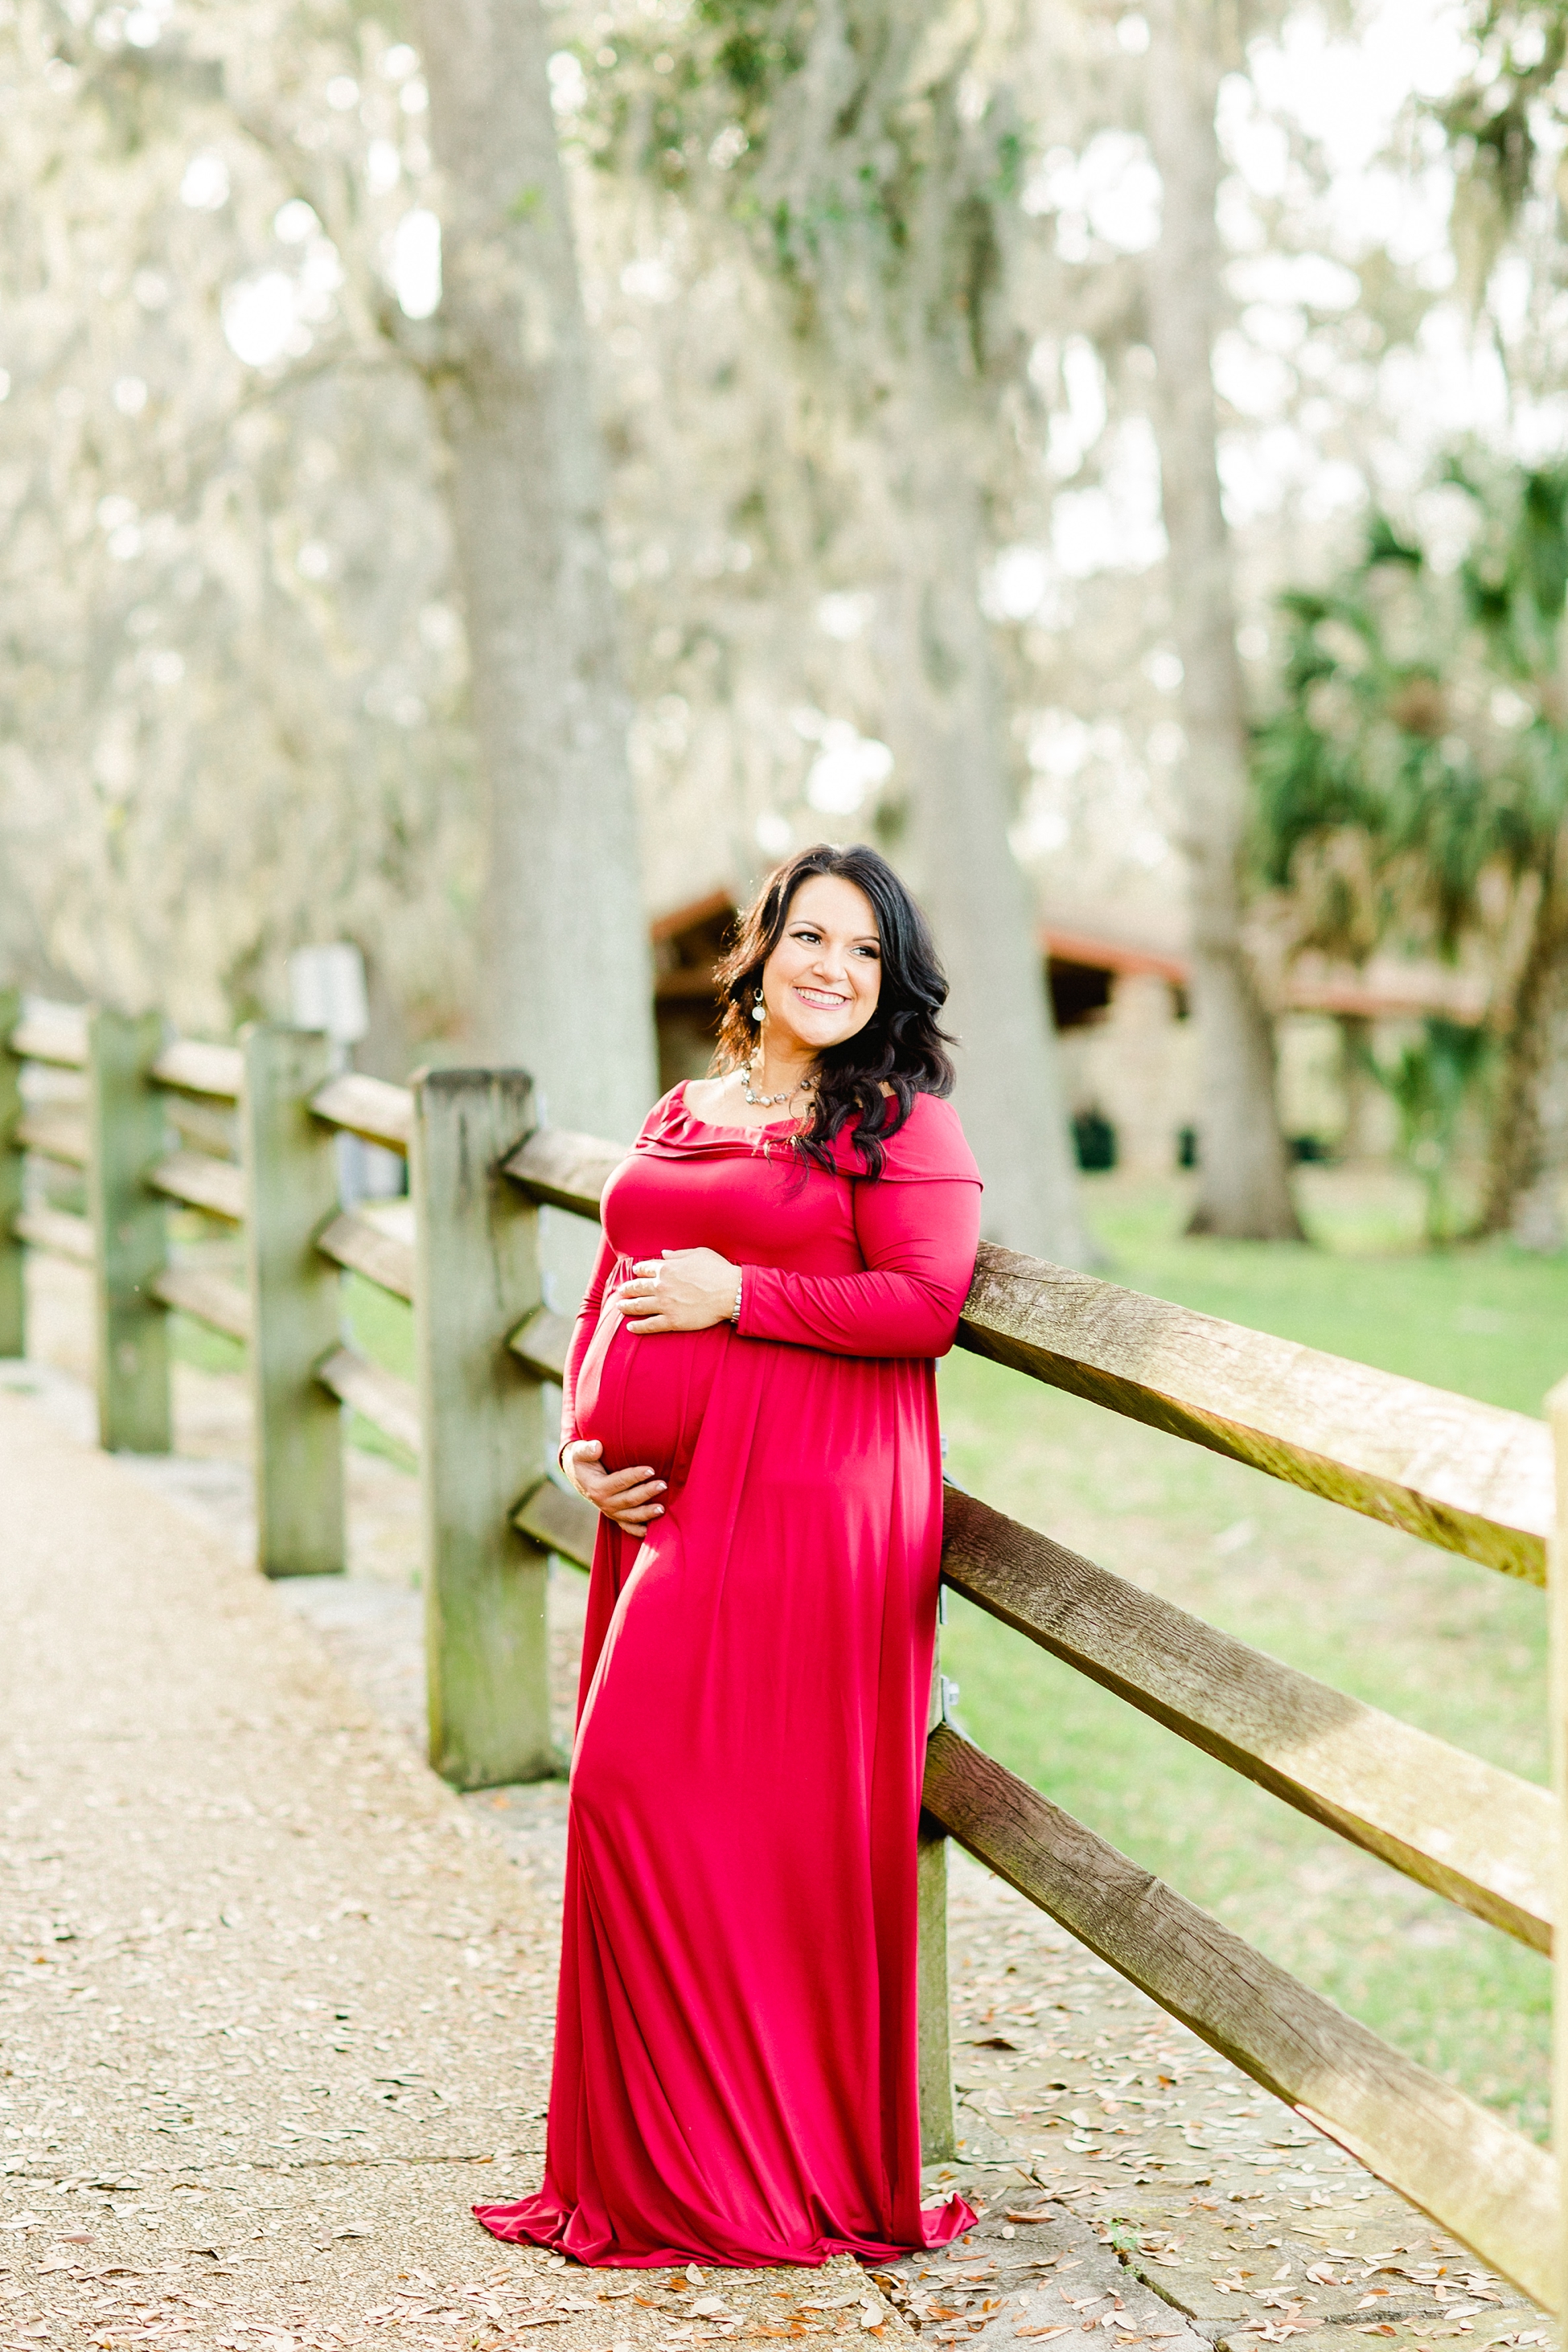 Maternity Photographer | © Ailyn LaTorre Photography 2018